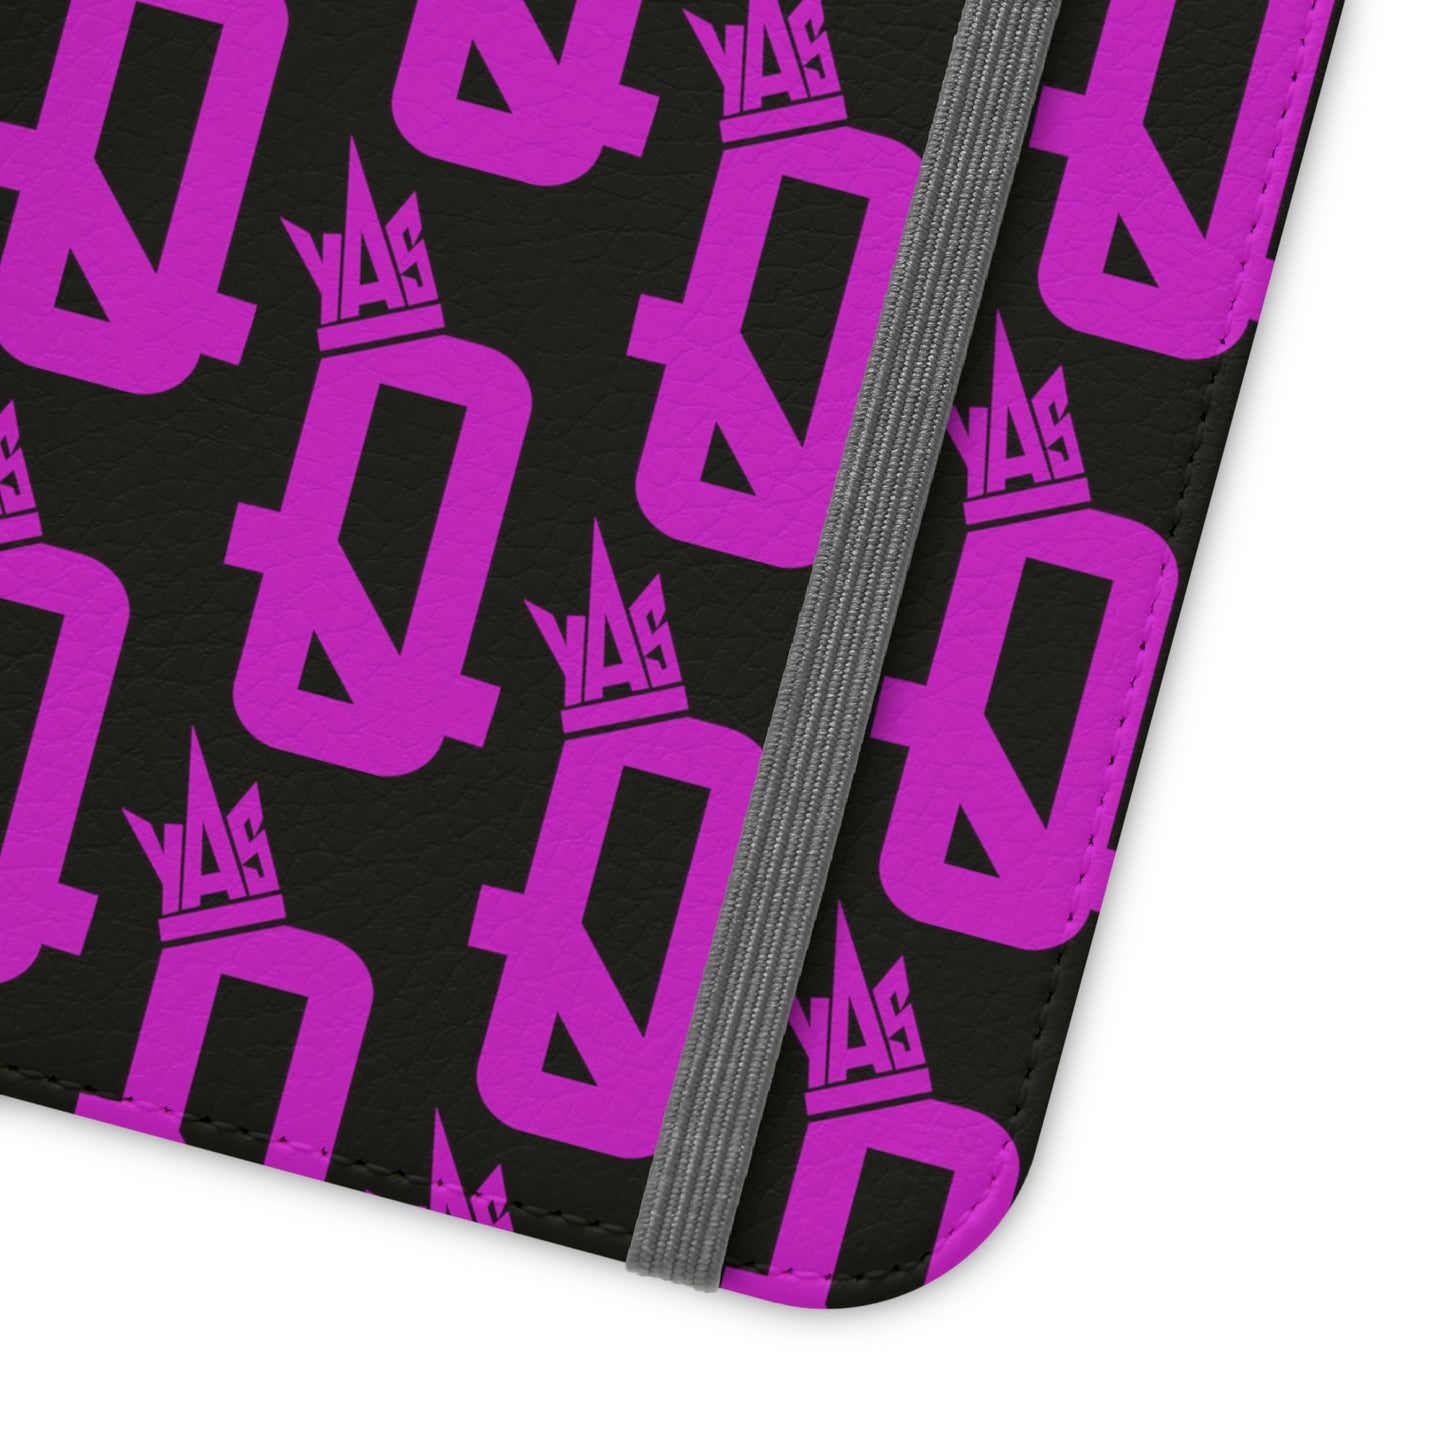 Bold Aspirations Phone Protection: Flip Cases